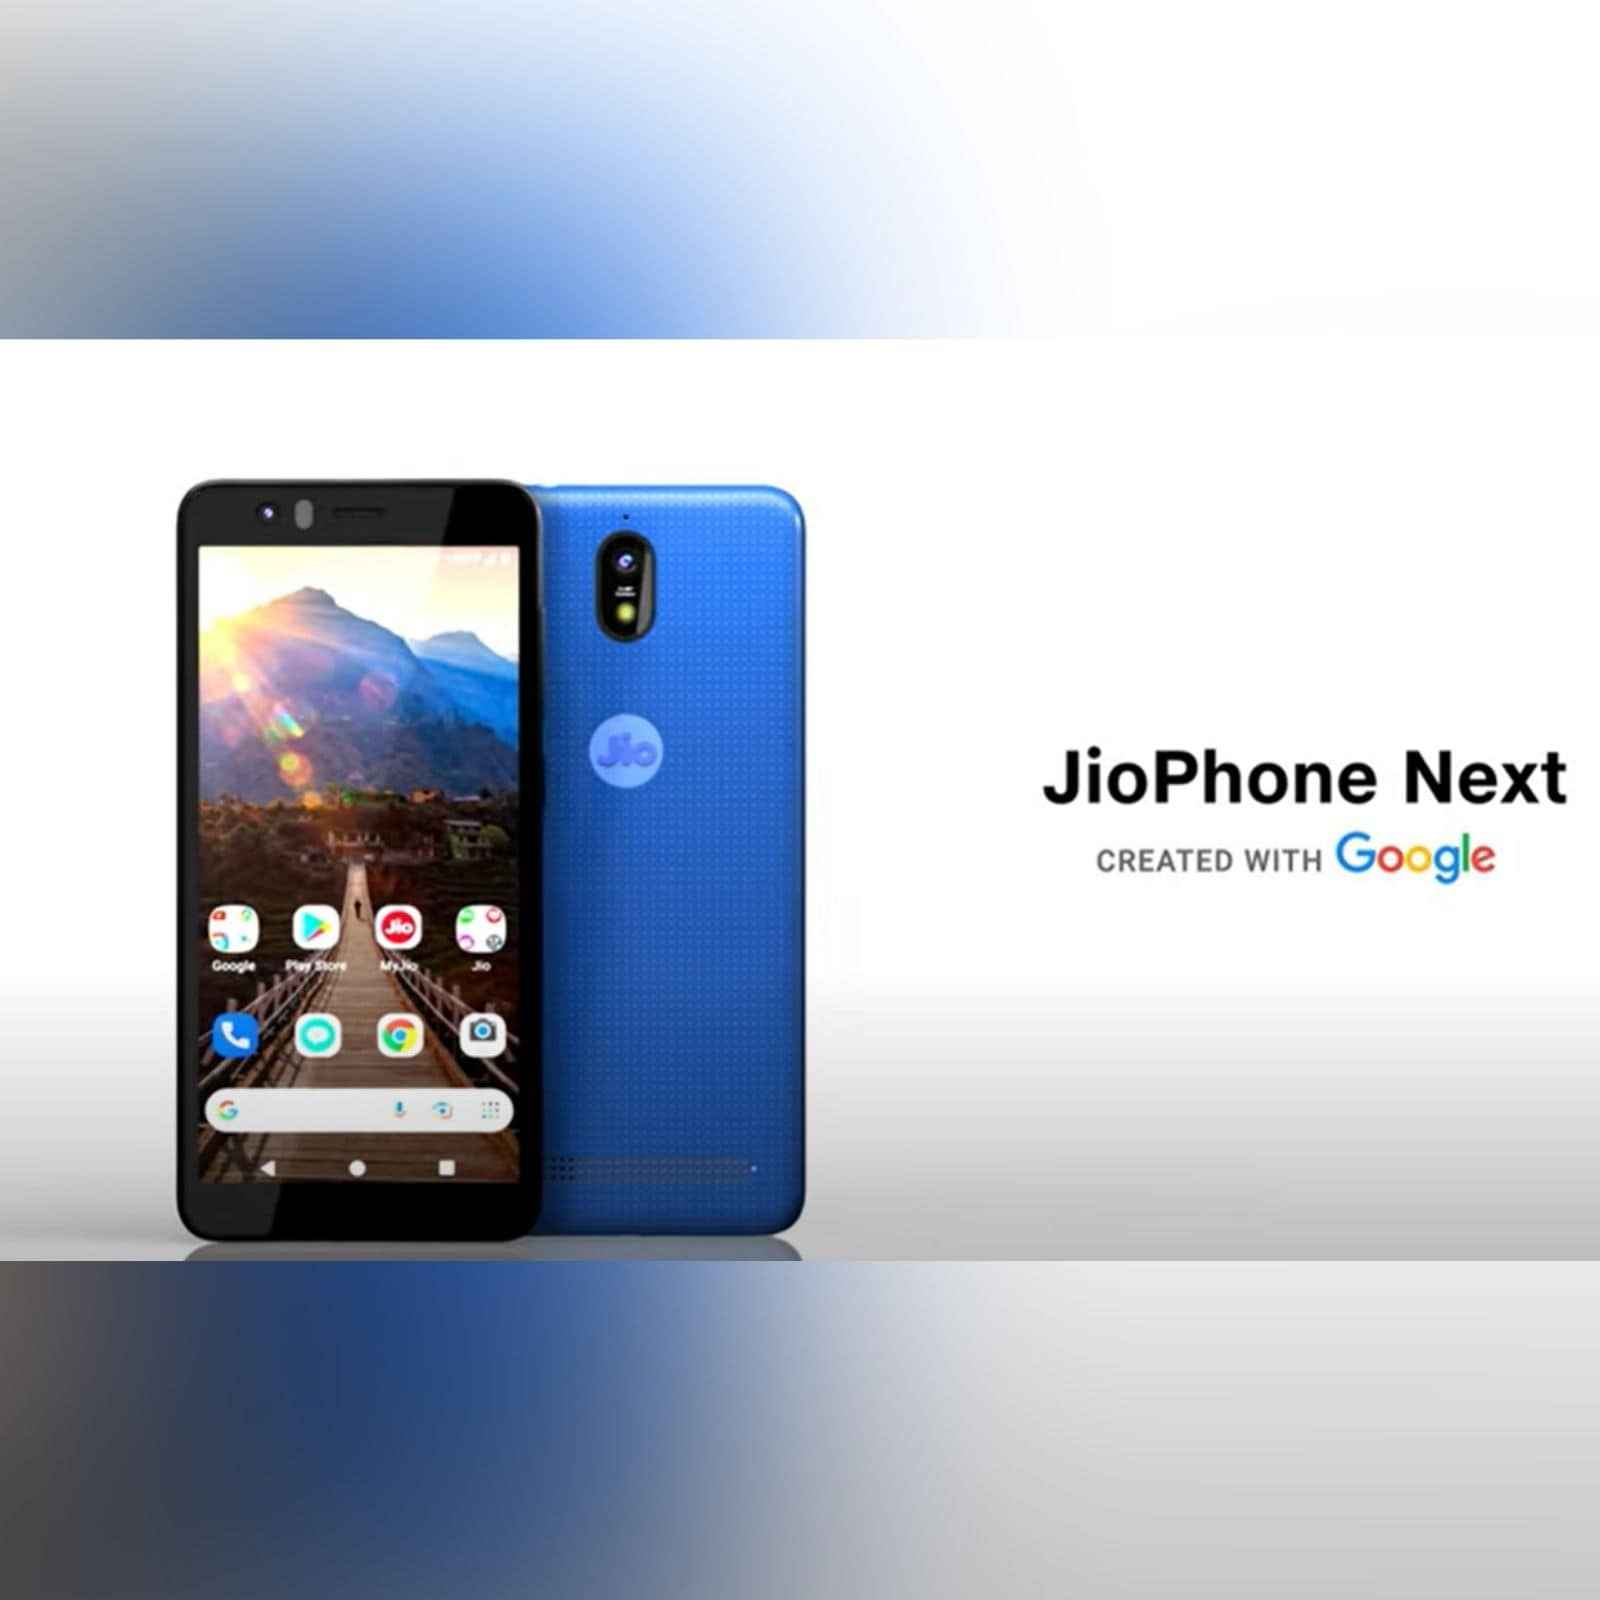 You can buy the cheapest JioPhone Next smartphone from today, knowing how to bring it home for just Rs 1,999!